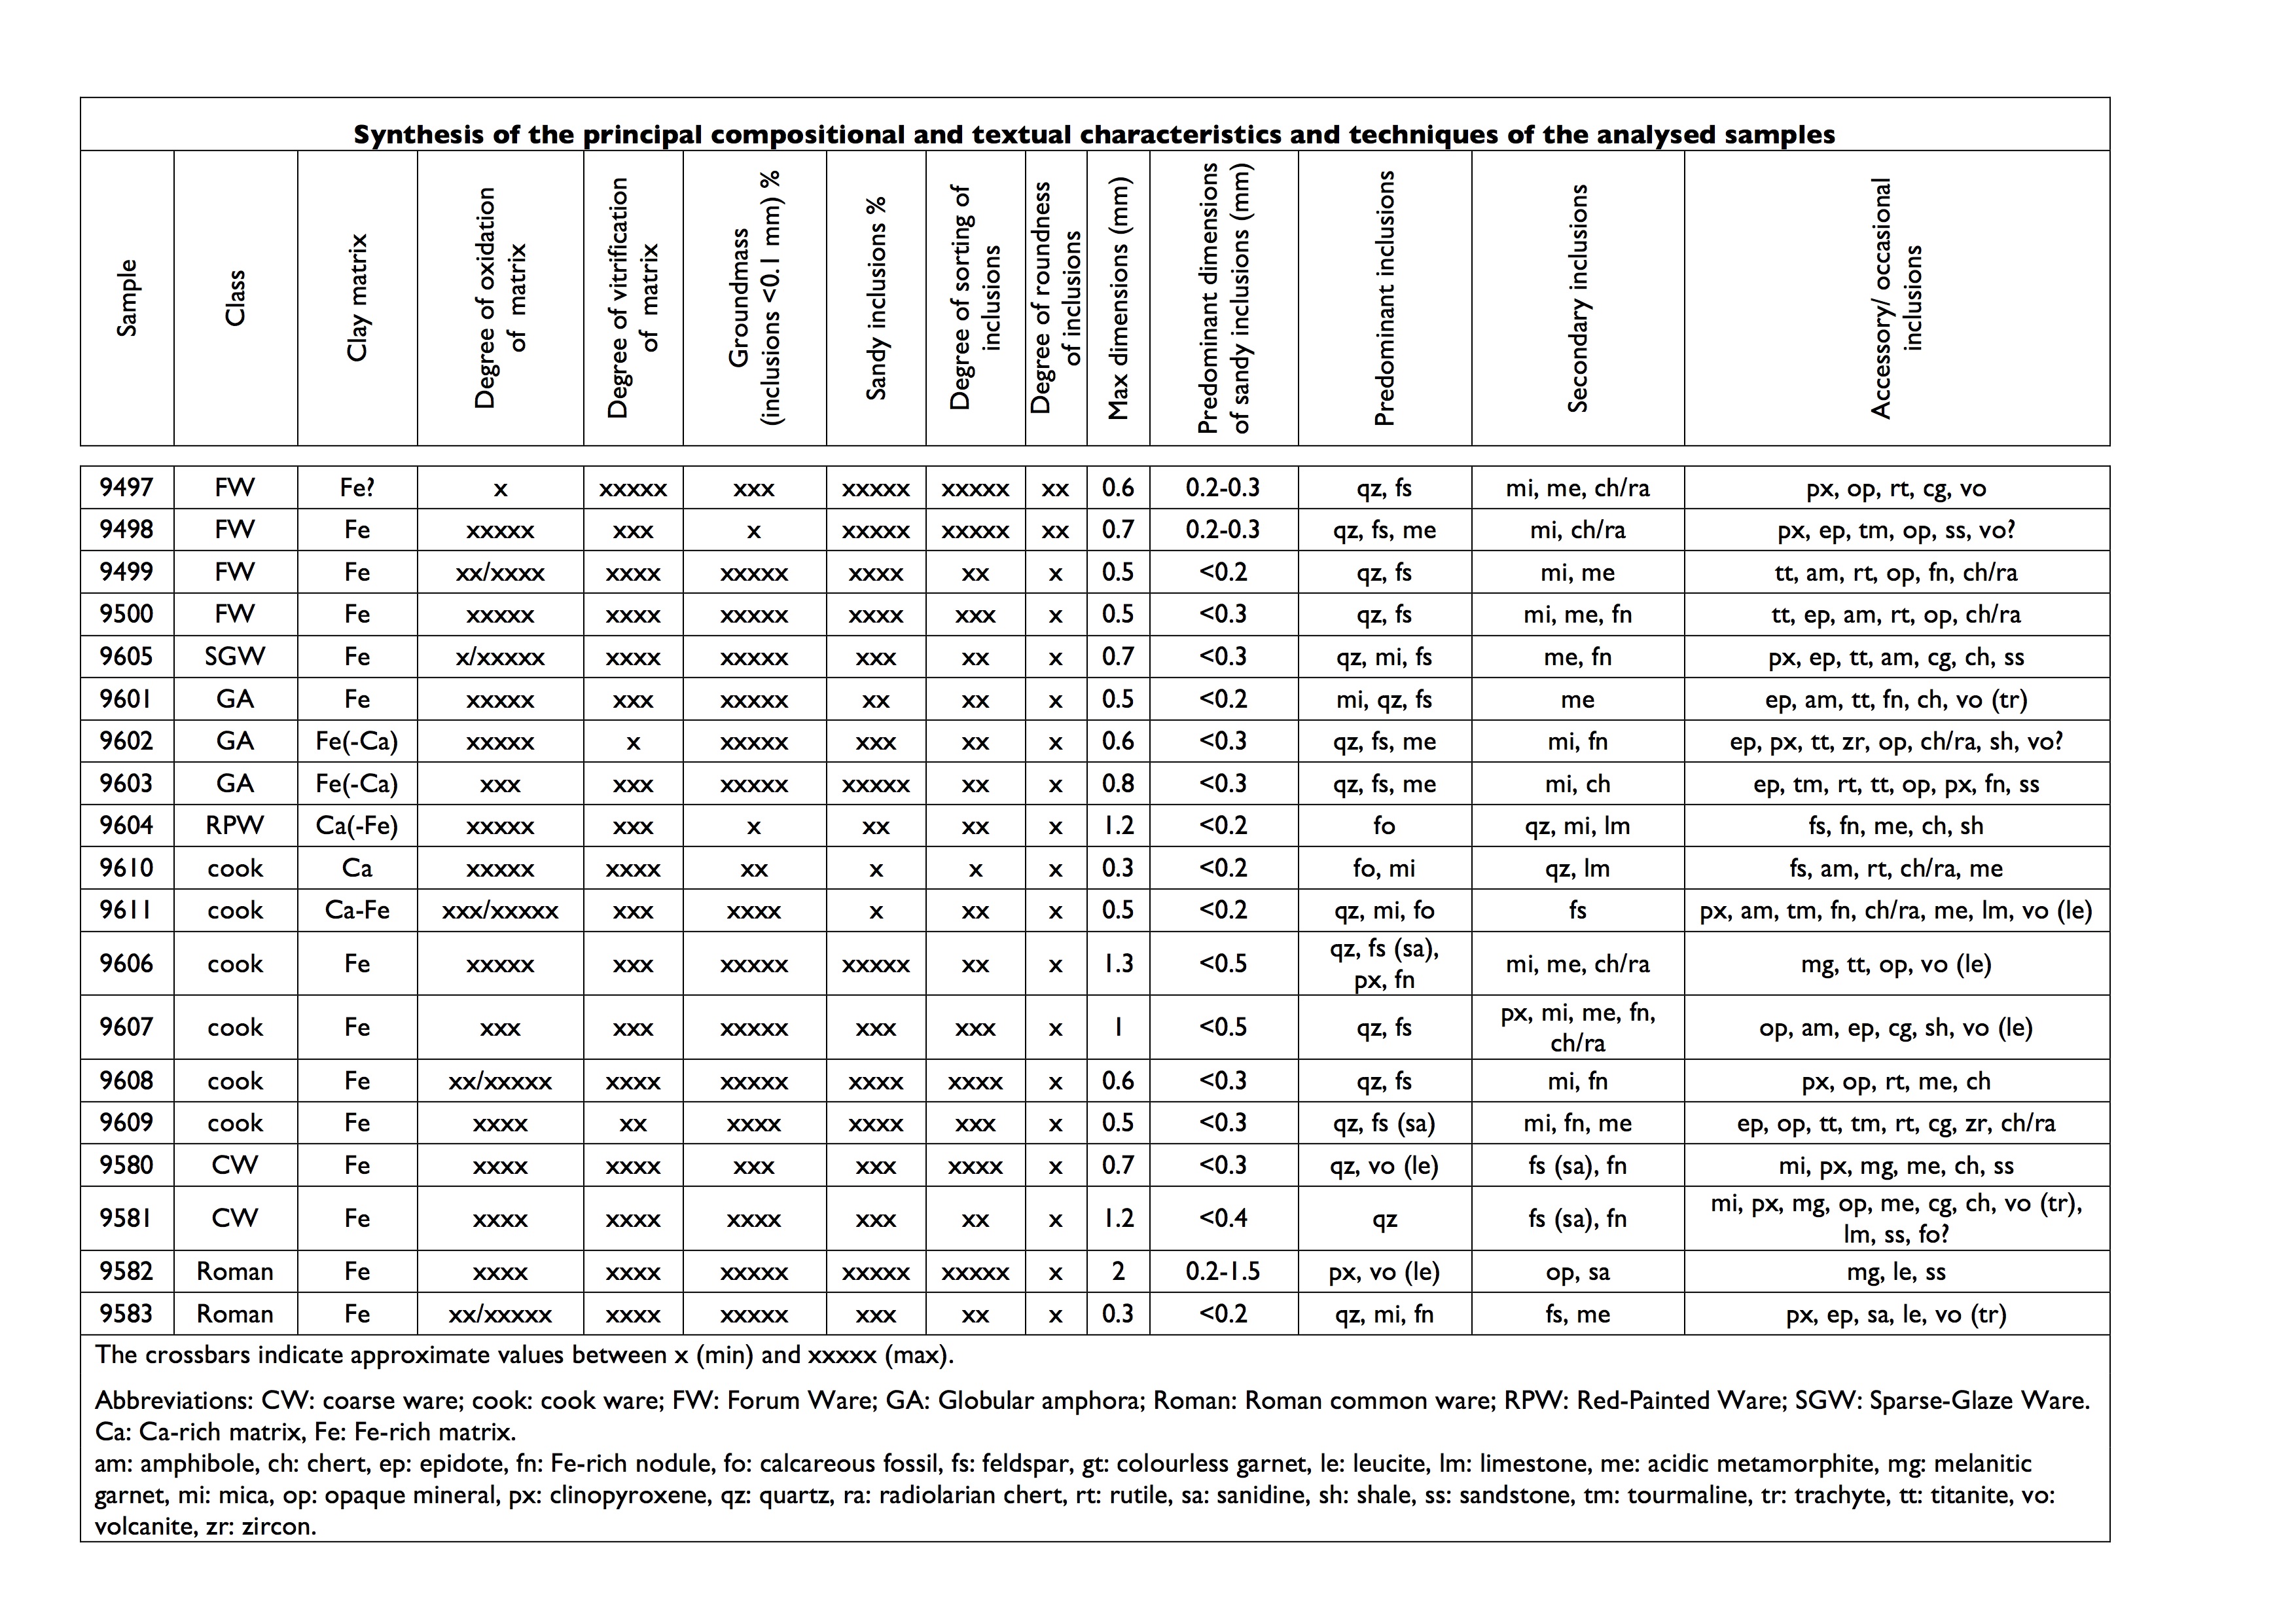 Table 2. Synthesis of the principal compositional and textual characteristics and techniques of the analysed samples.